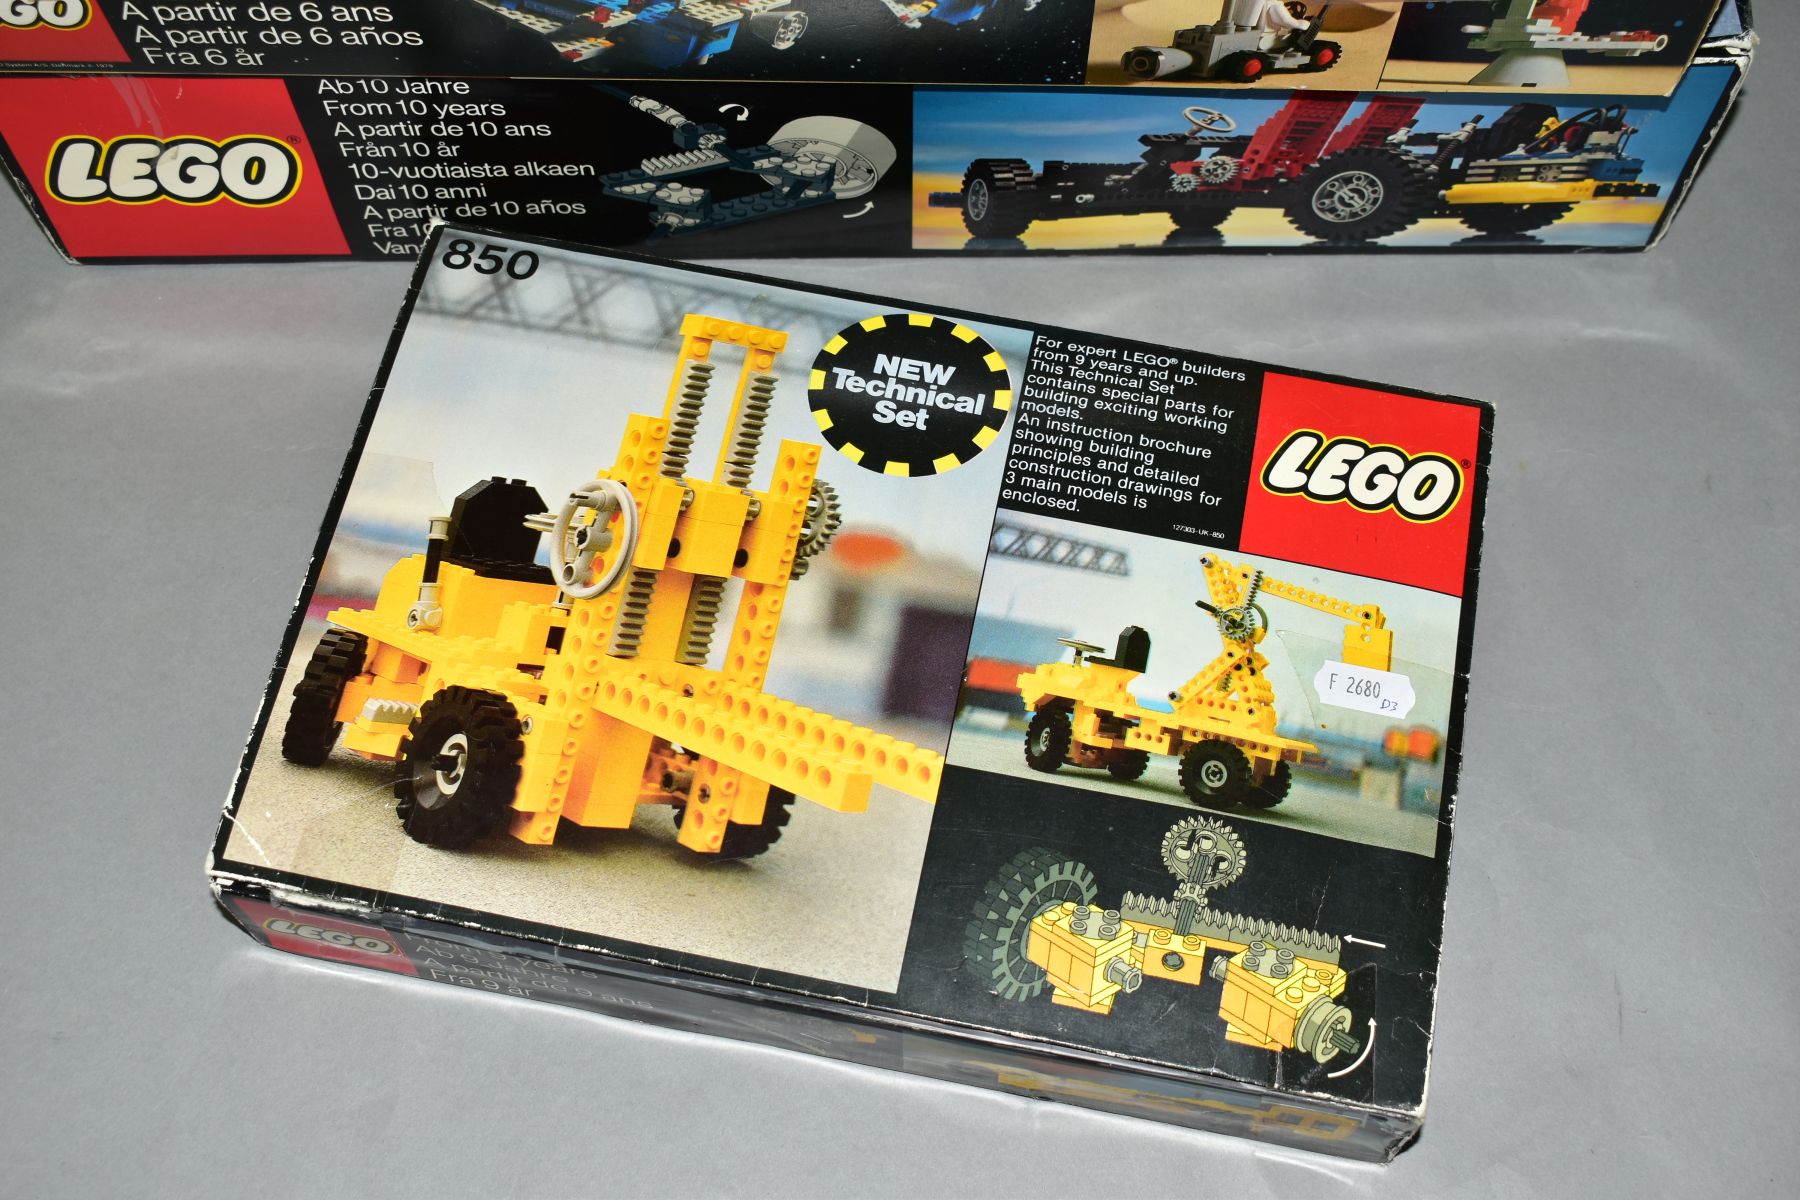 THREE BOXED LATE 1970'S/EARLY 1980'S LEGO SETS, Fork Lift Truck Technical set, No 850, Car Chassis - Image 6 of 7